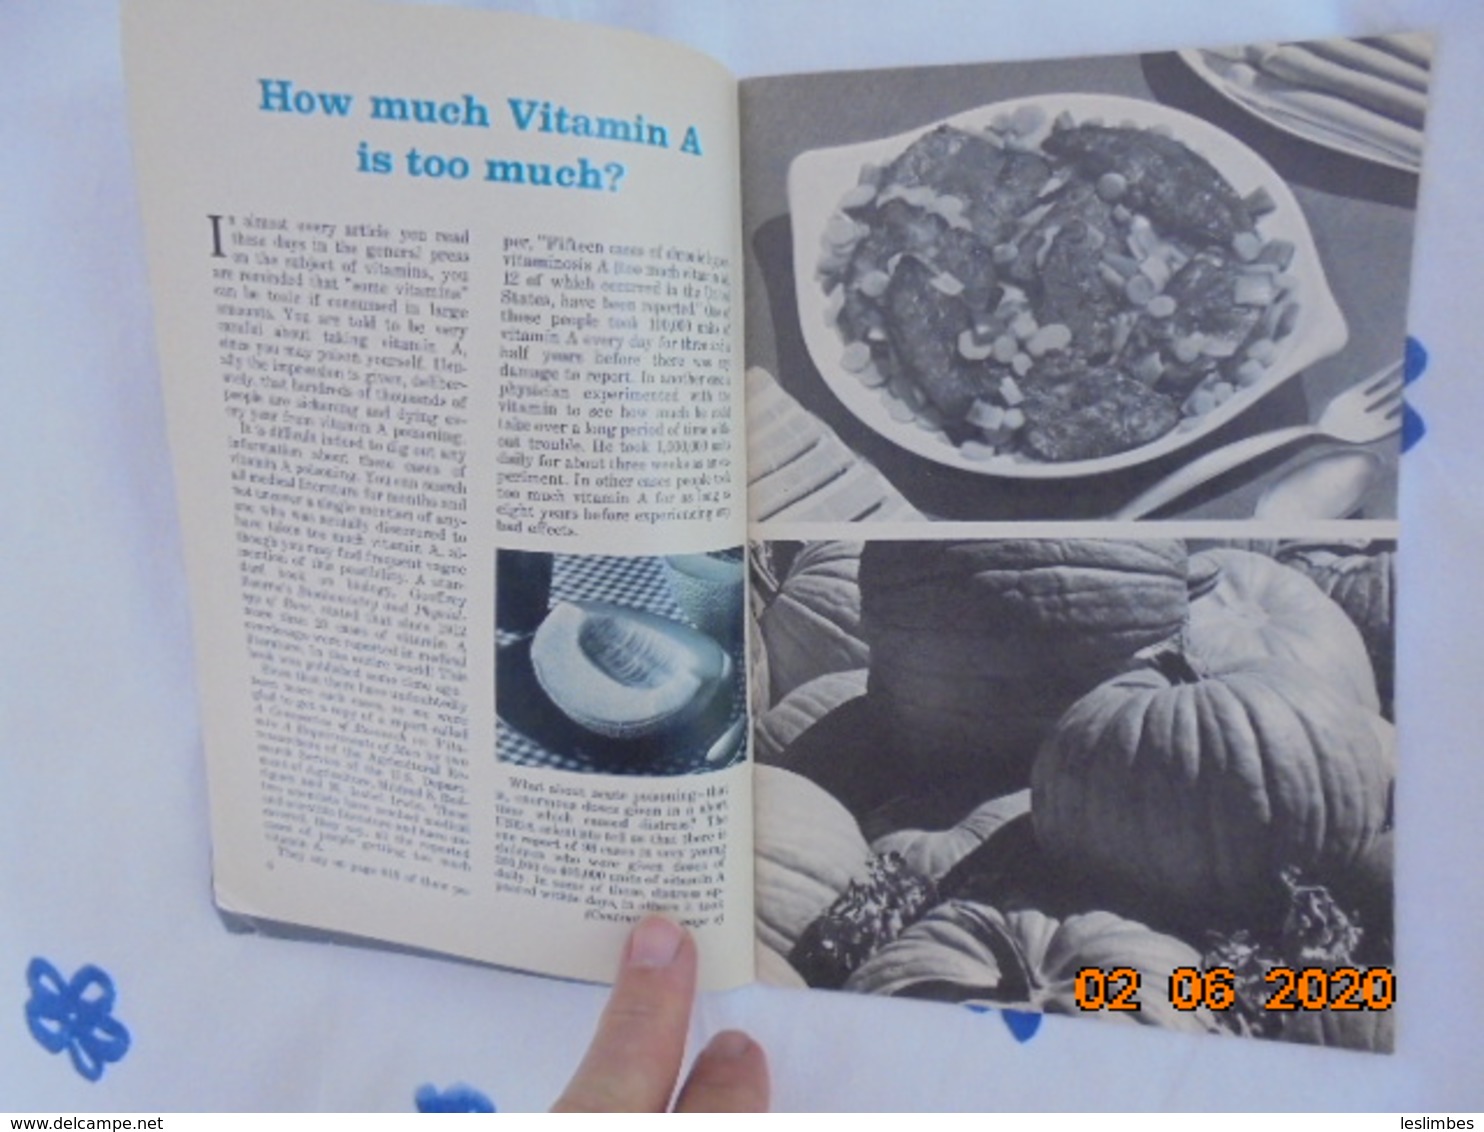 Today's Living, Volume 7 (April 1976) Number 4. Syndicate Magazines / Howard's Nutrition Of Newport Beach - Alternative Medicine